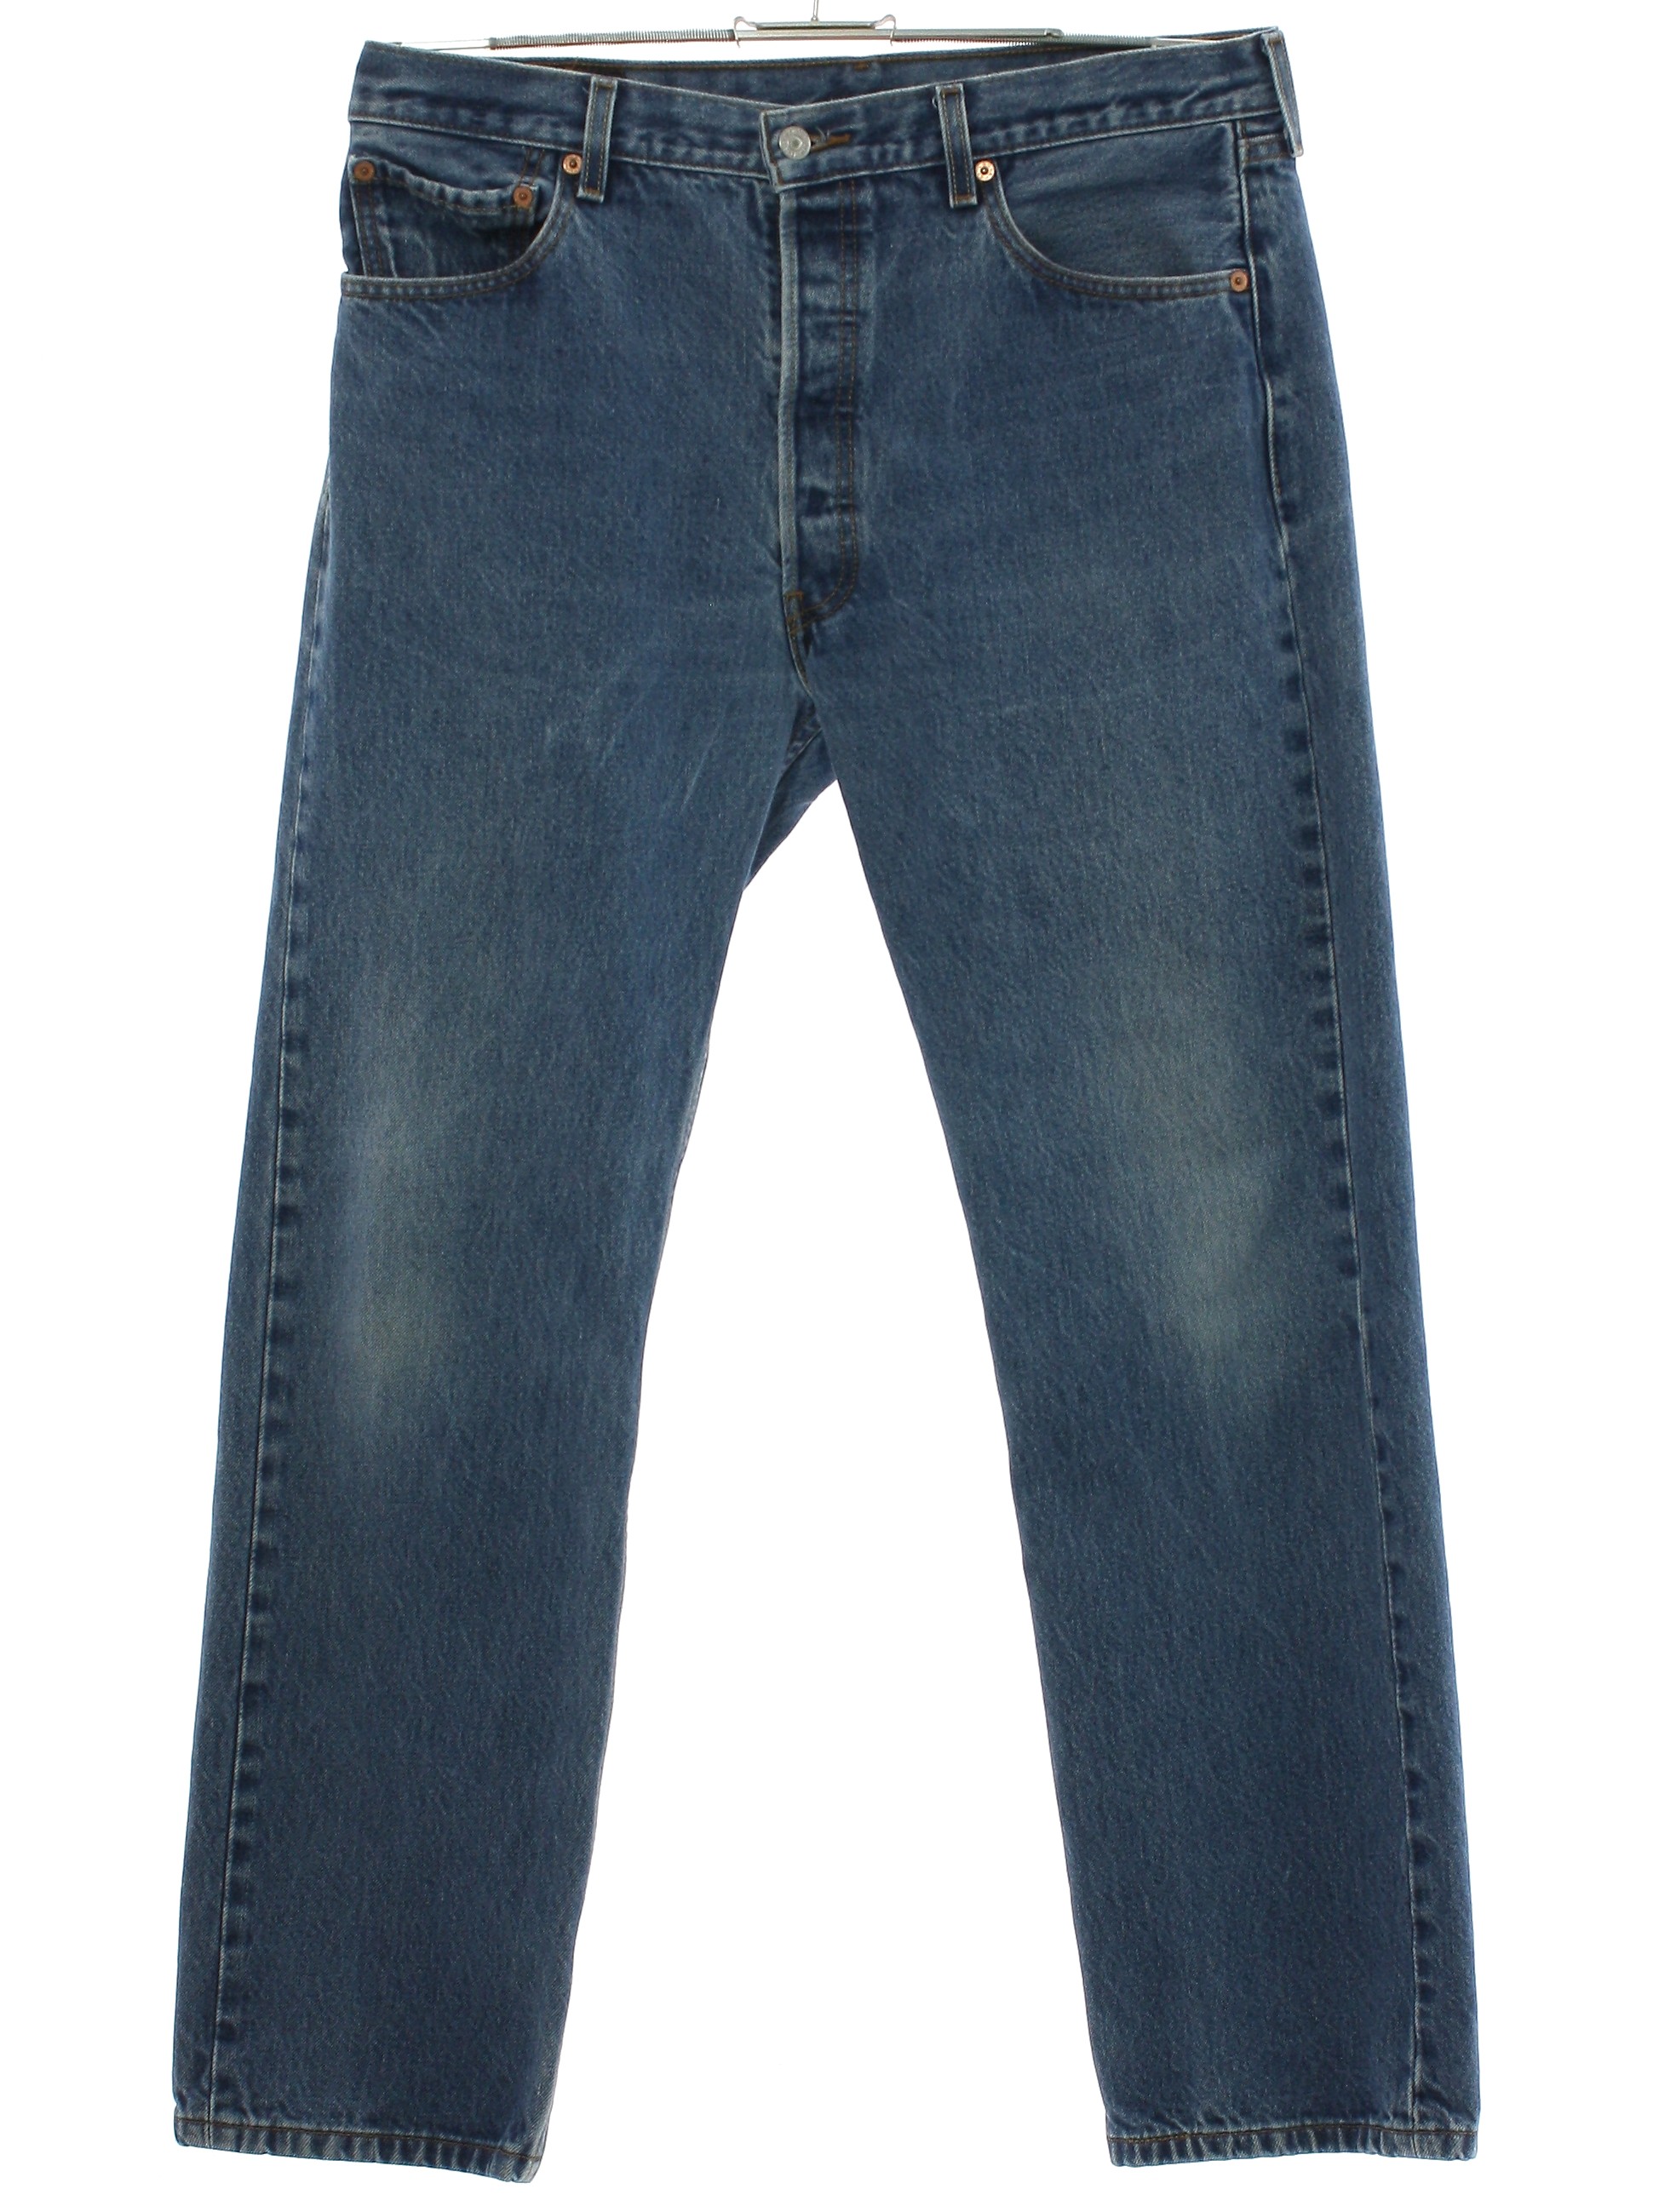 Pants: 90s (2006) -Levis 501 xx- Mens slightly faded and worn blue ...